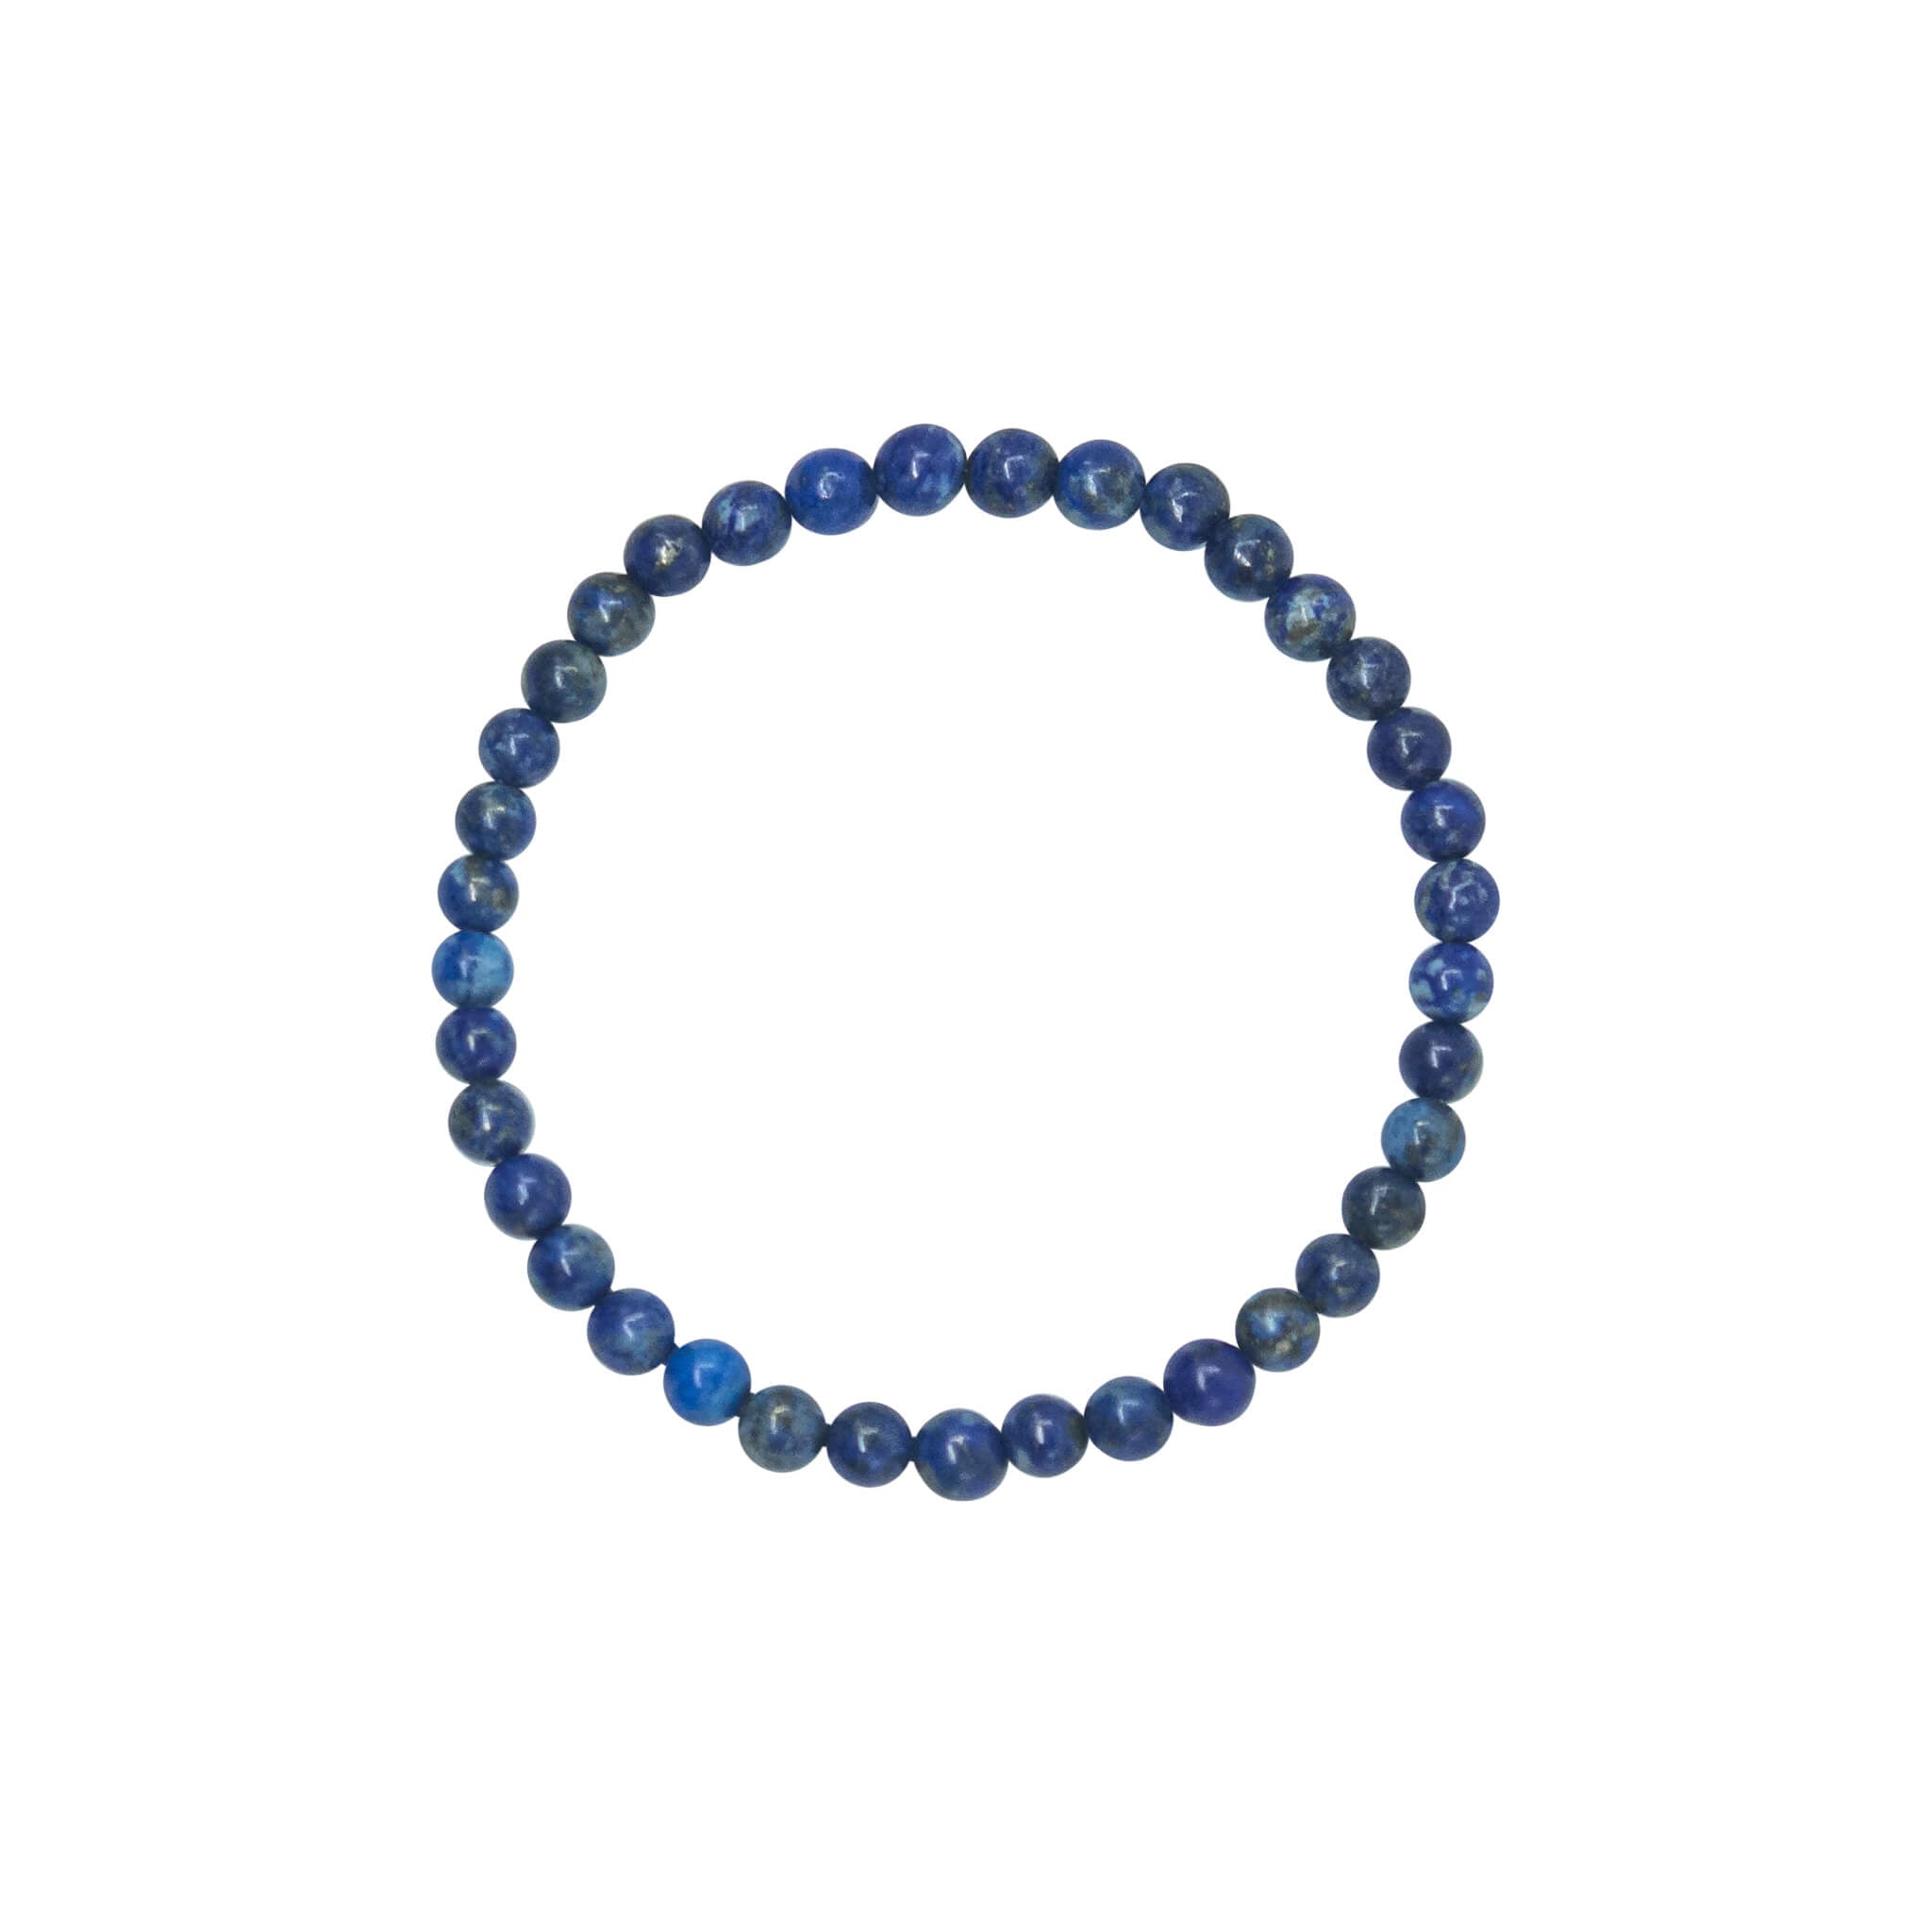 Buy Reiki Crystal Products Certified Lapis Lazuli Bracelet Round Beads 10  mm Crystal Stone Bracelet for Reiki Healing and Crystal Healing Stones  Bracelet (Color : Blue) at Amazon.in